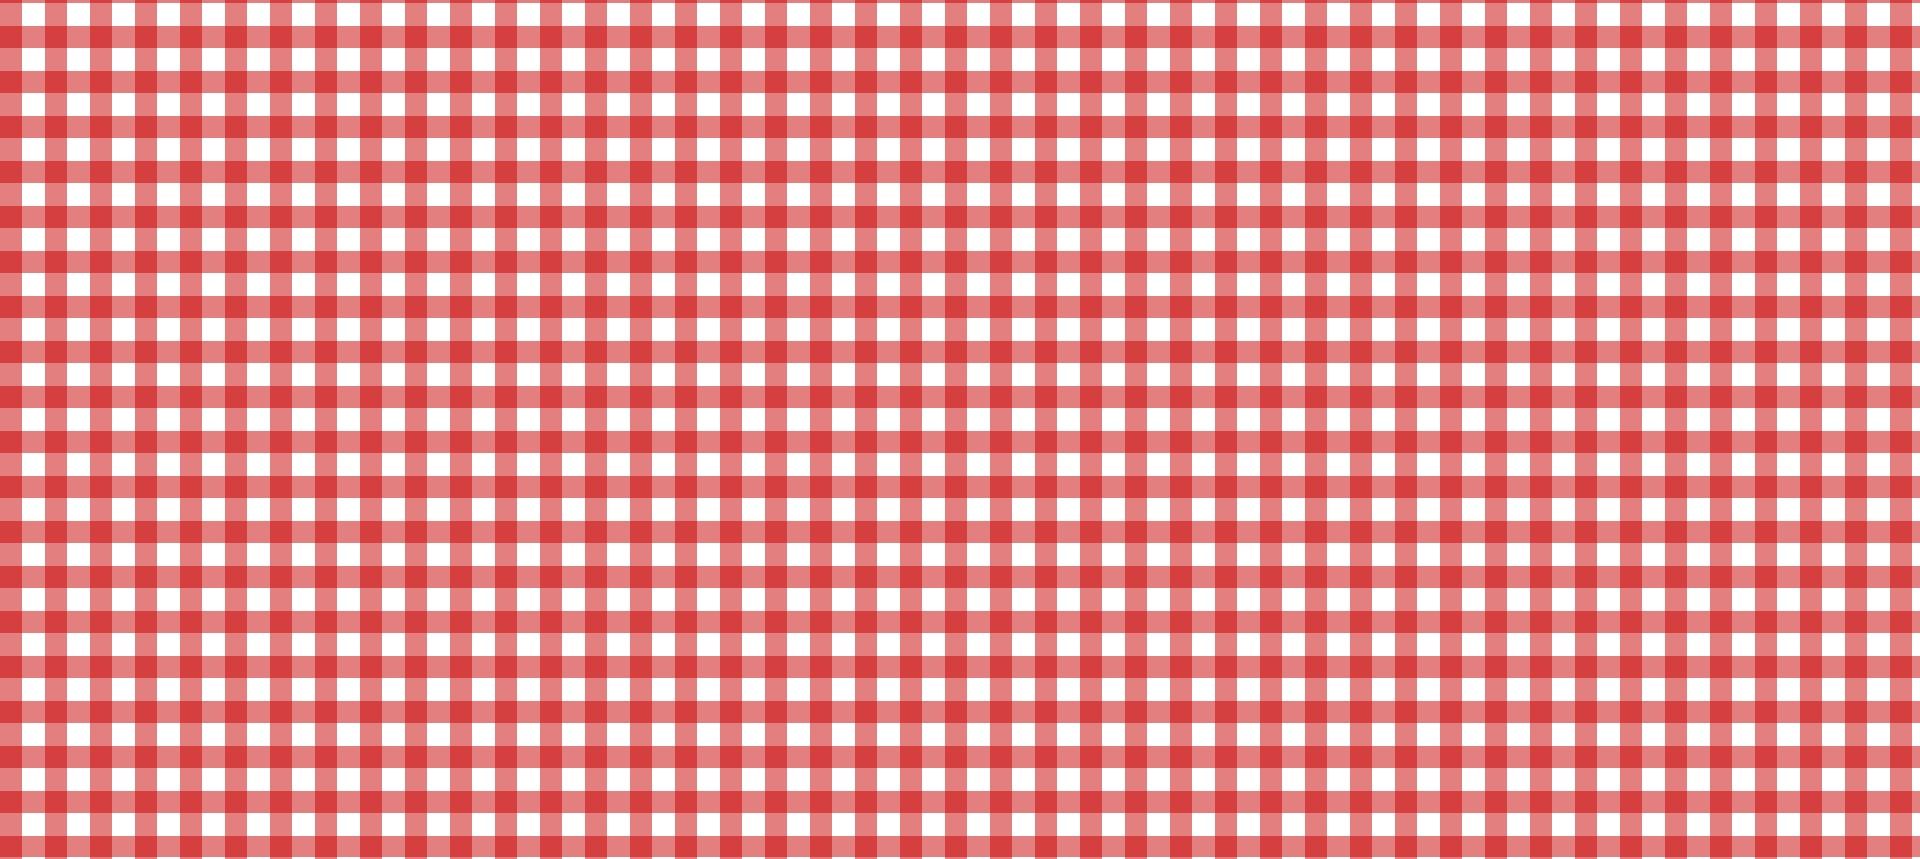 Table Cloth background pattern